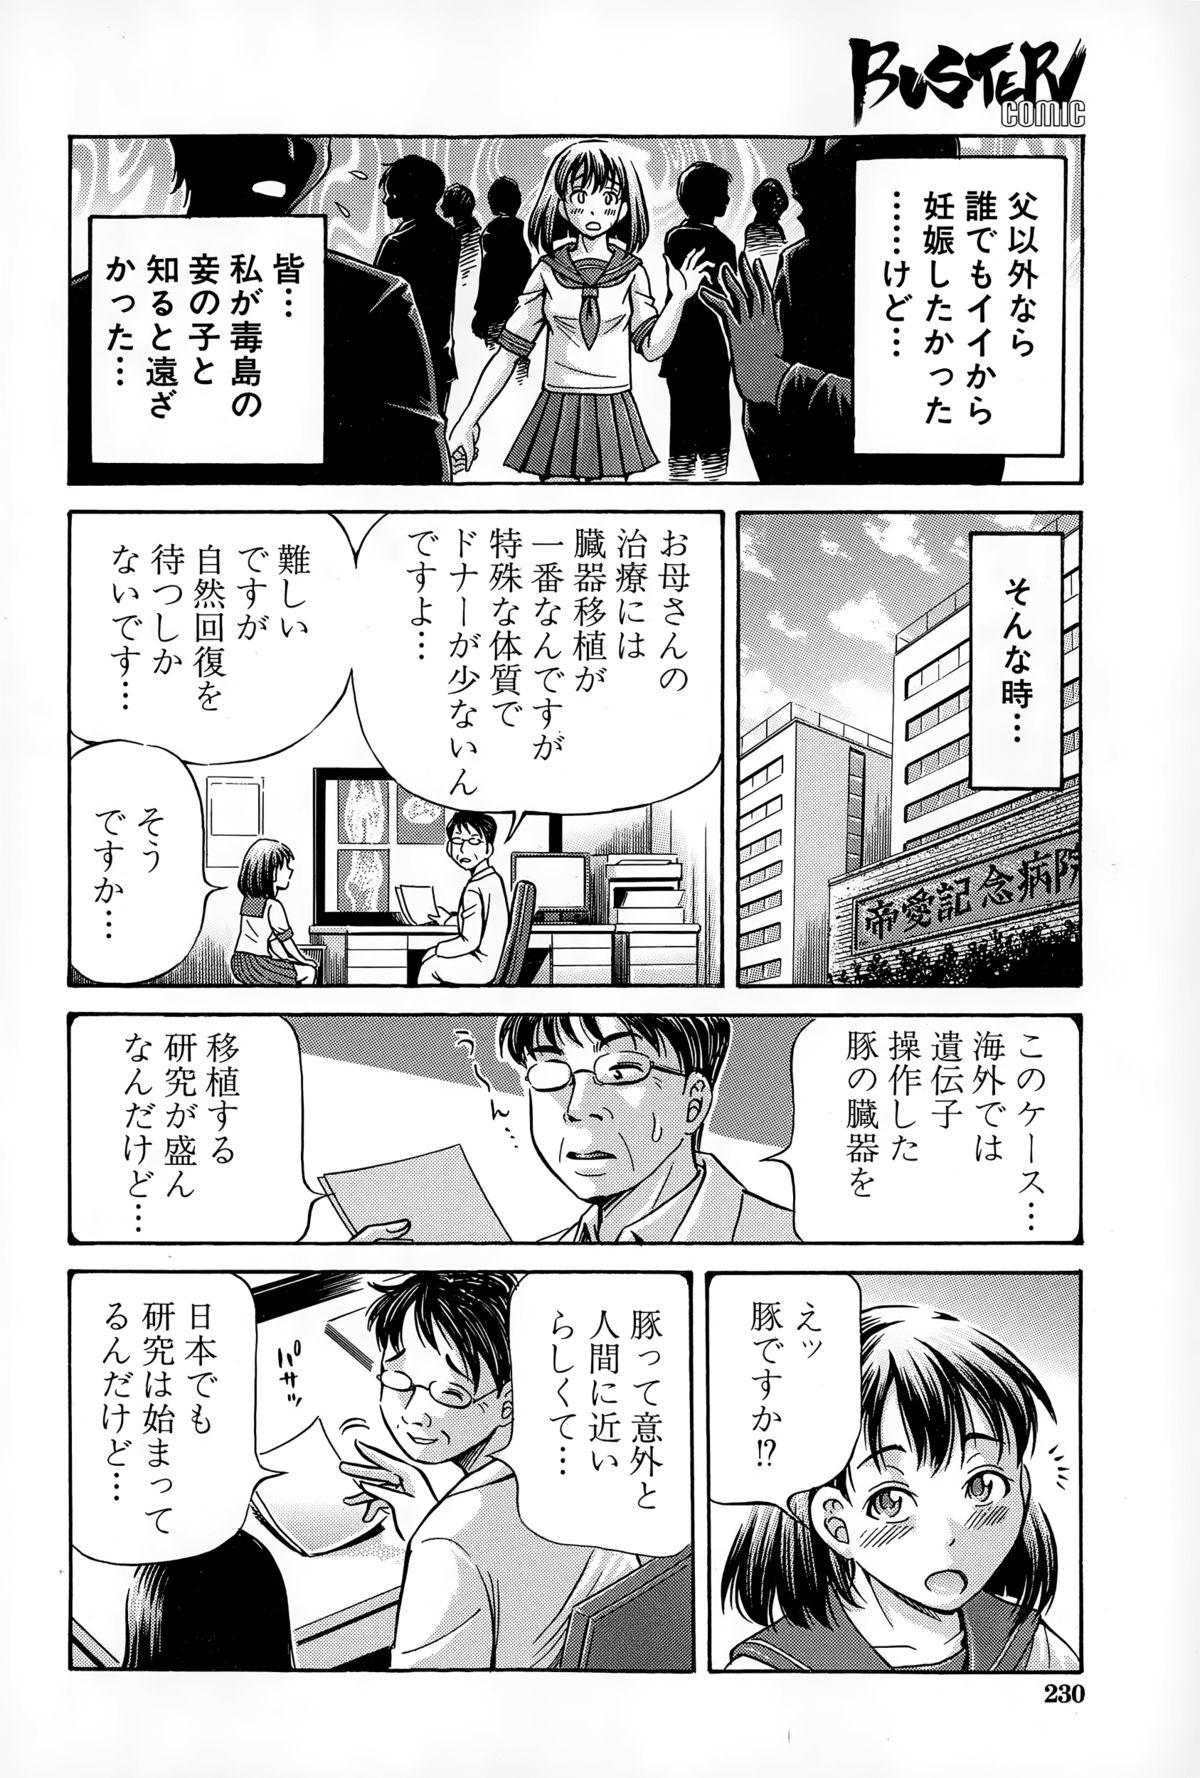 BUSTER COMIC 2015-03 229